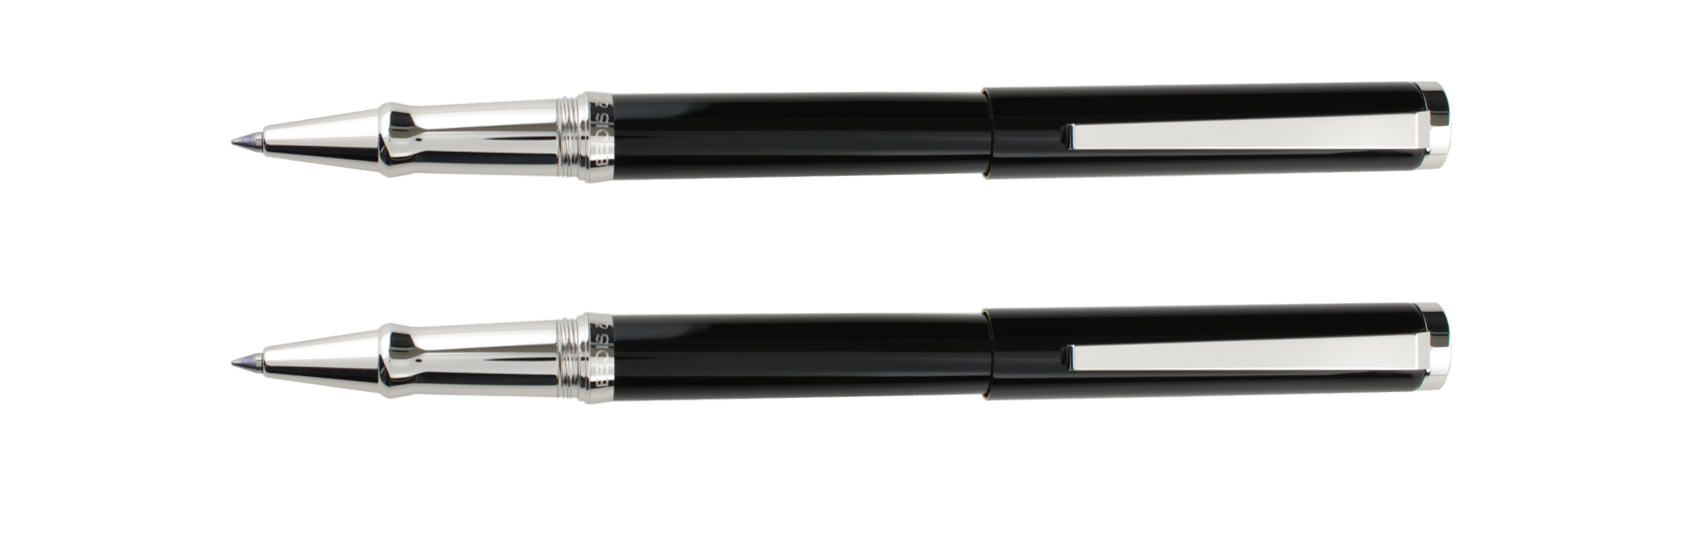 Introducing the Avantgarde ONE Rollerball